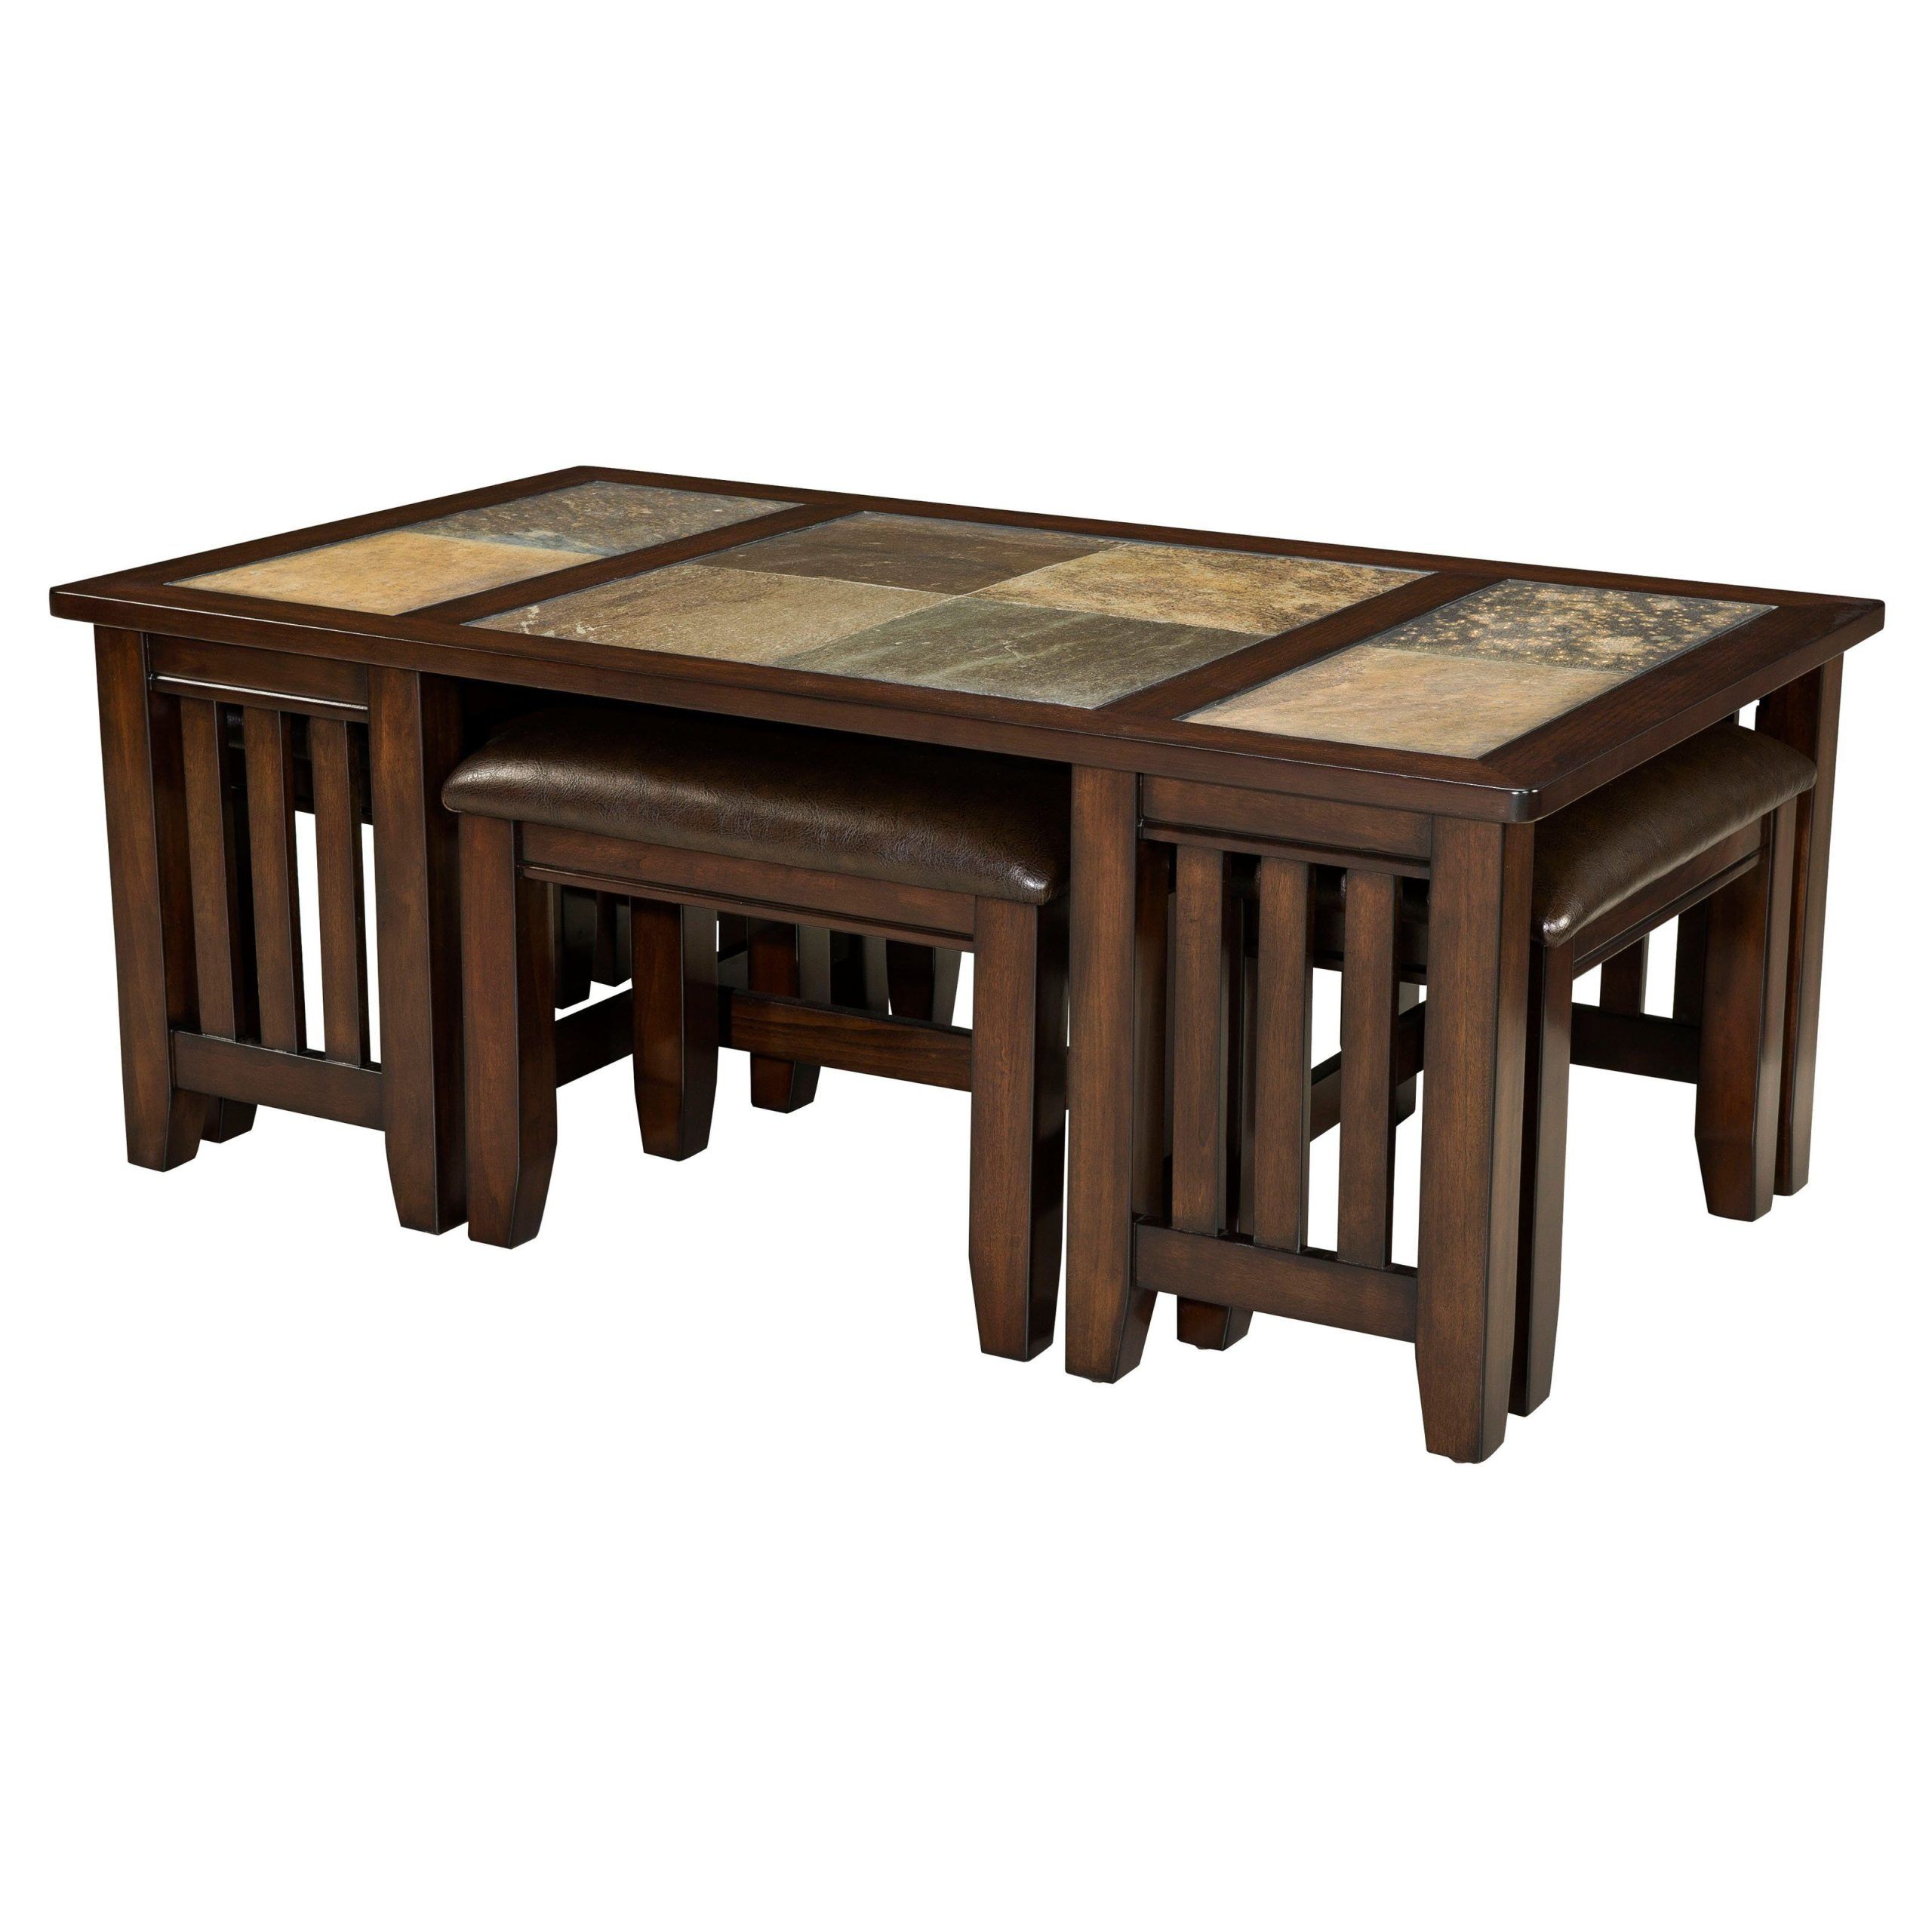 2019 Standard Furniture Napa Valley Rectangle Wood And Stone Top Coffee In Coffee Tables For 4 6 People (View 9 of 15)